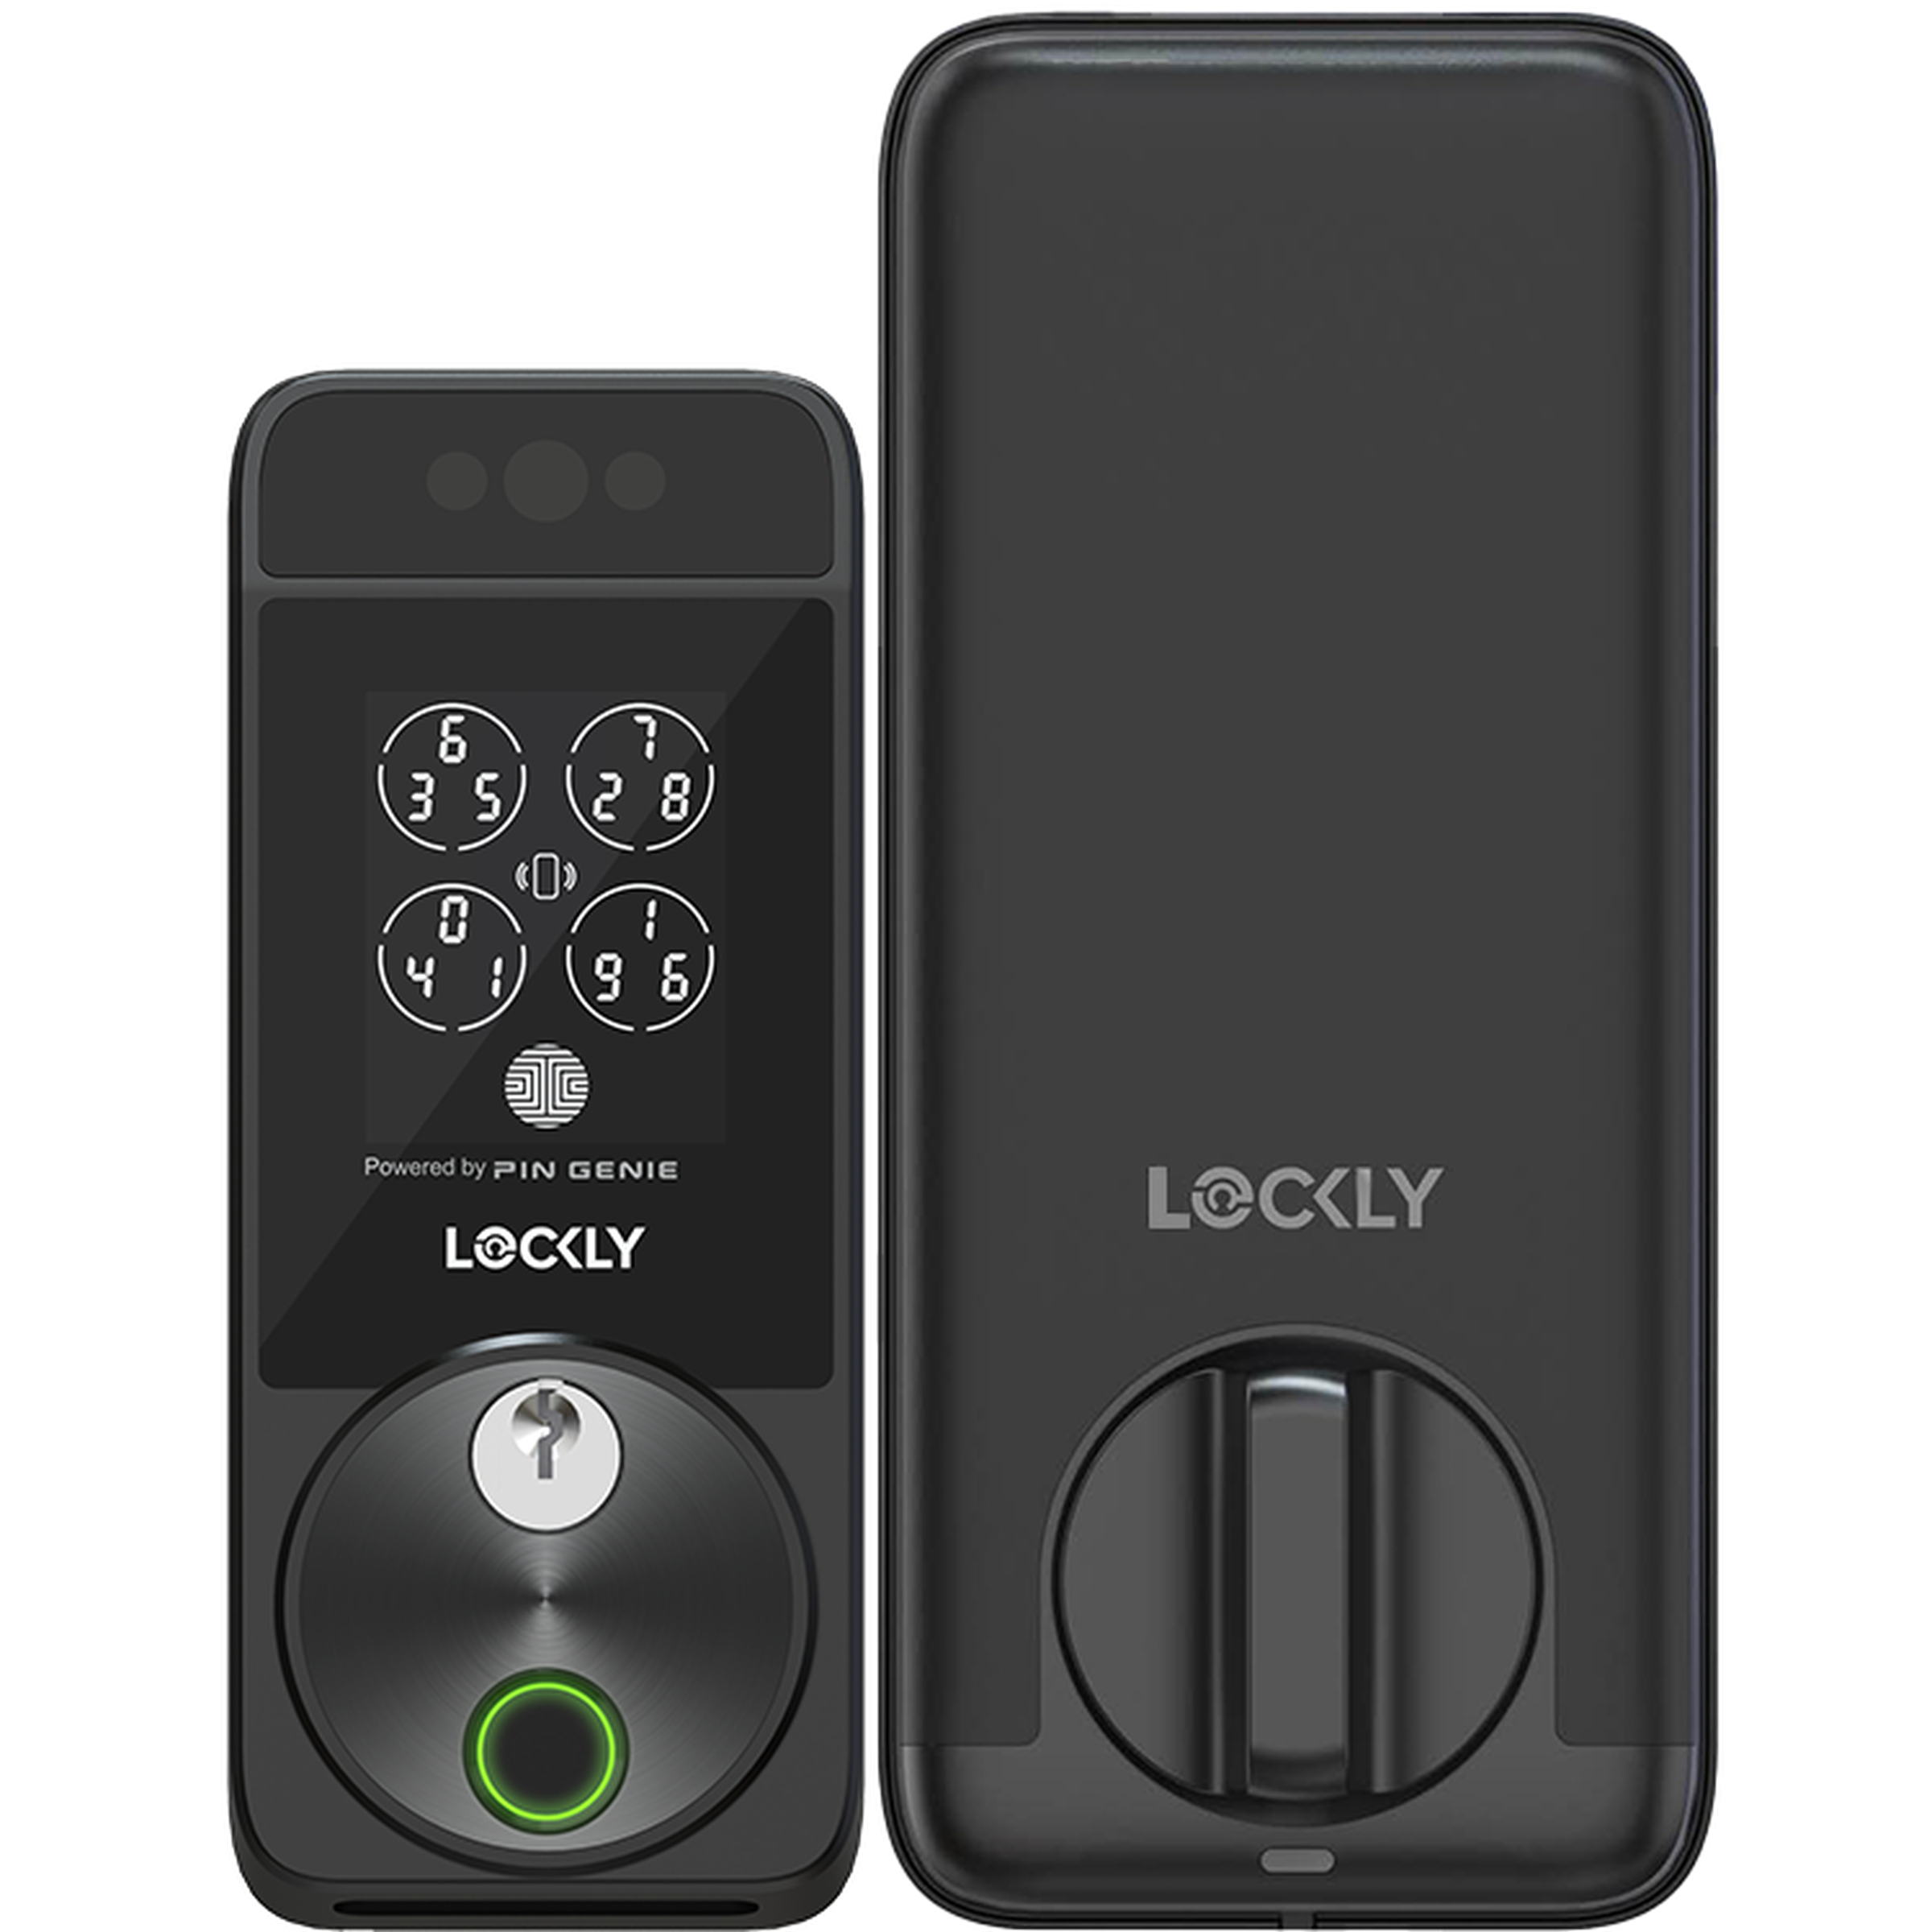 The Lockly Visage has a fingerprint reader, digital keypad, keyed lock, and facial recognition tech for multiple ways to unlock your front door. 